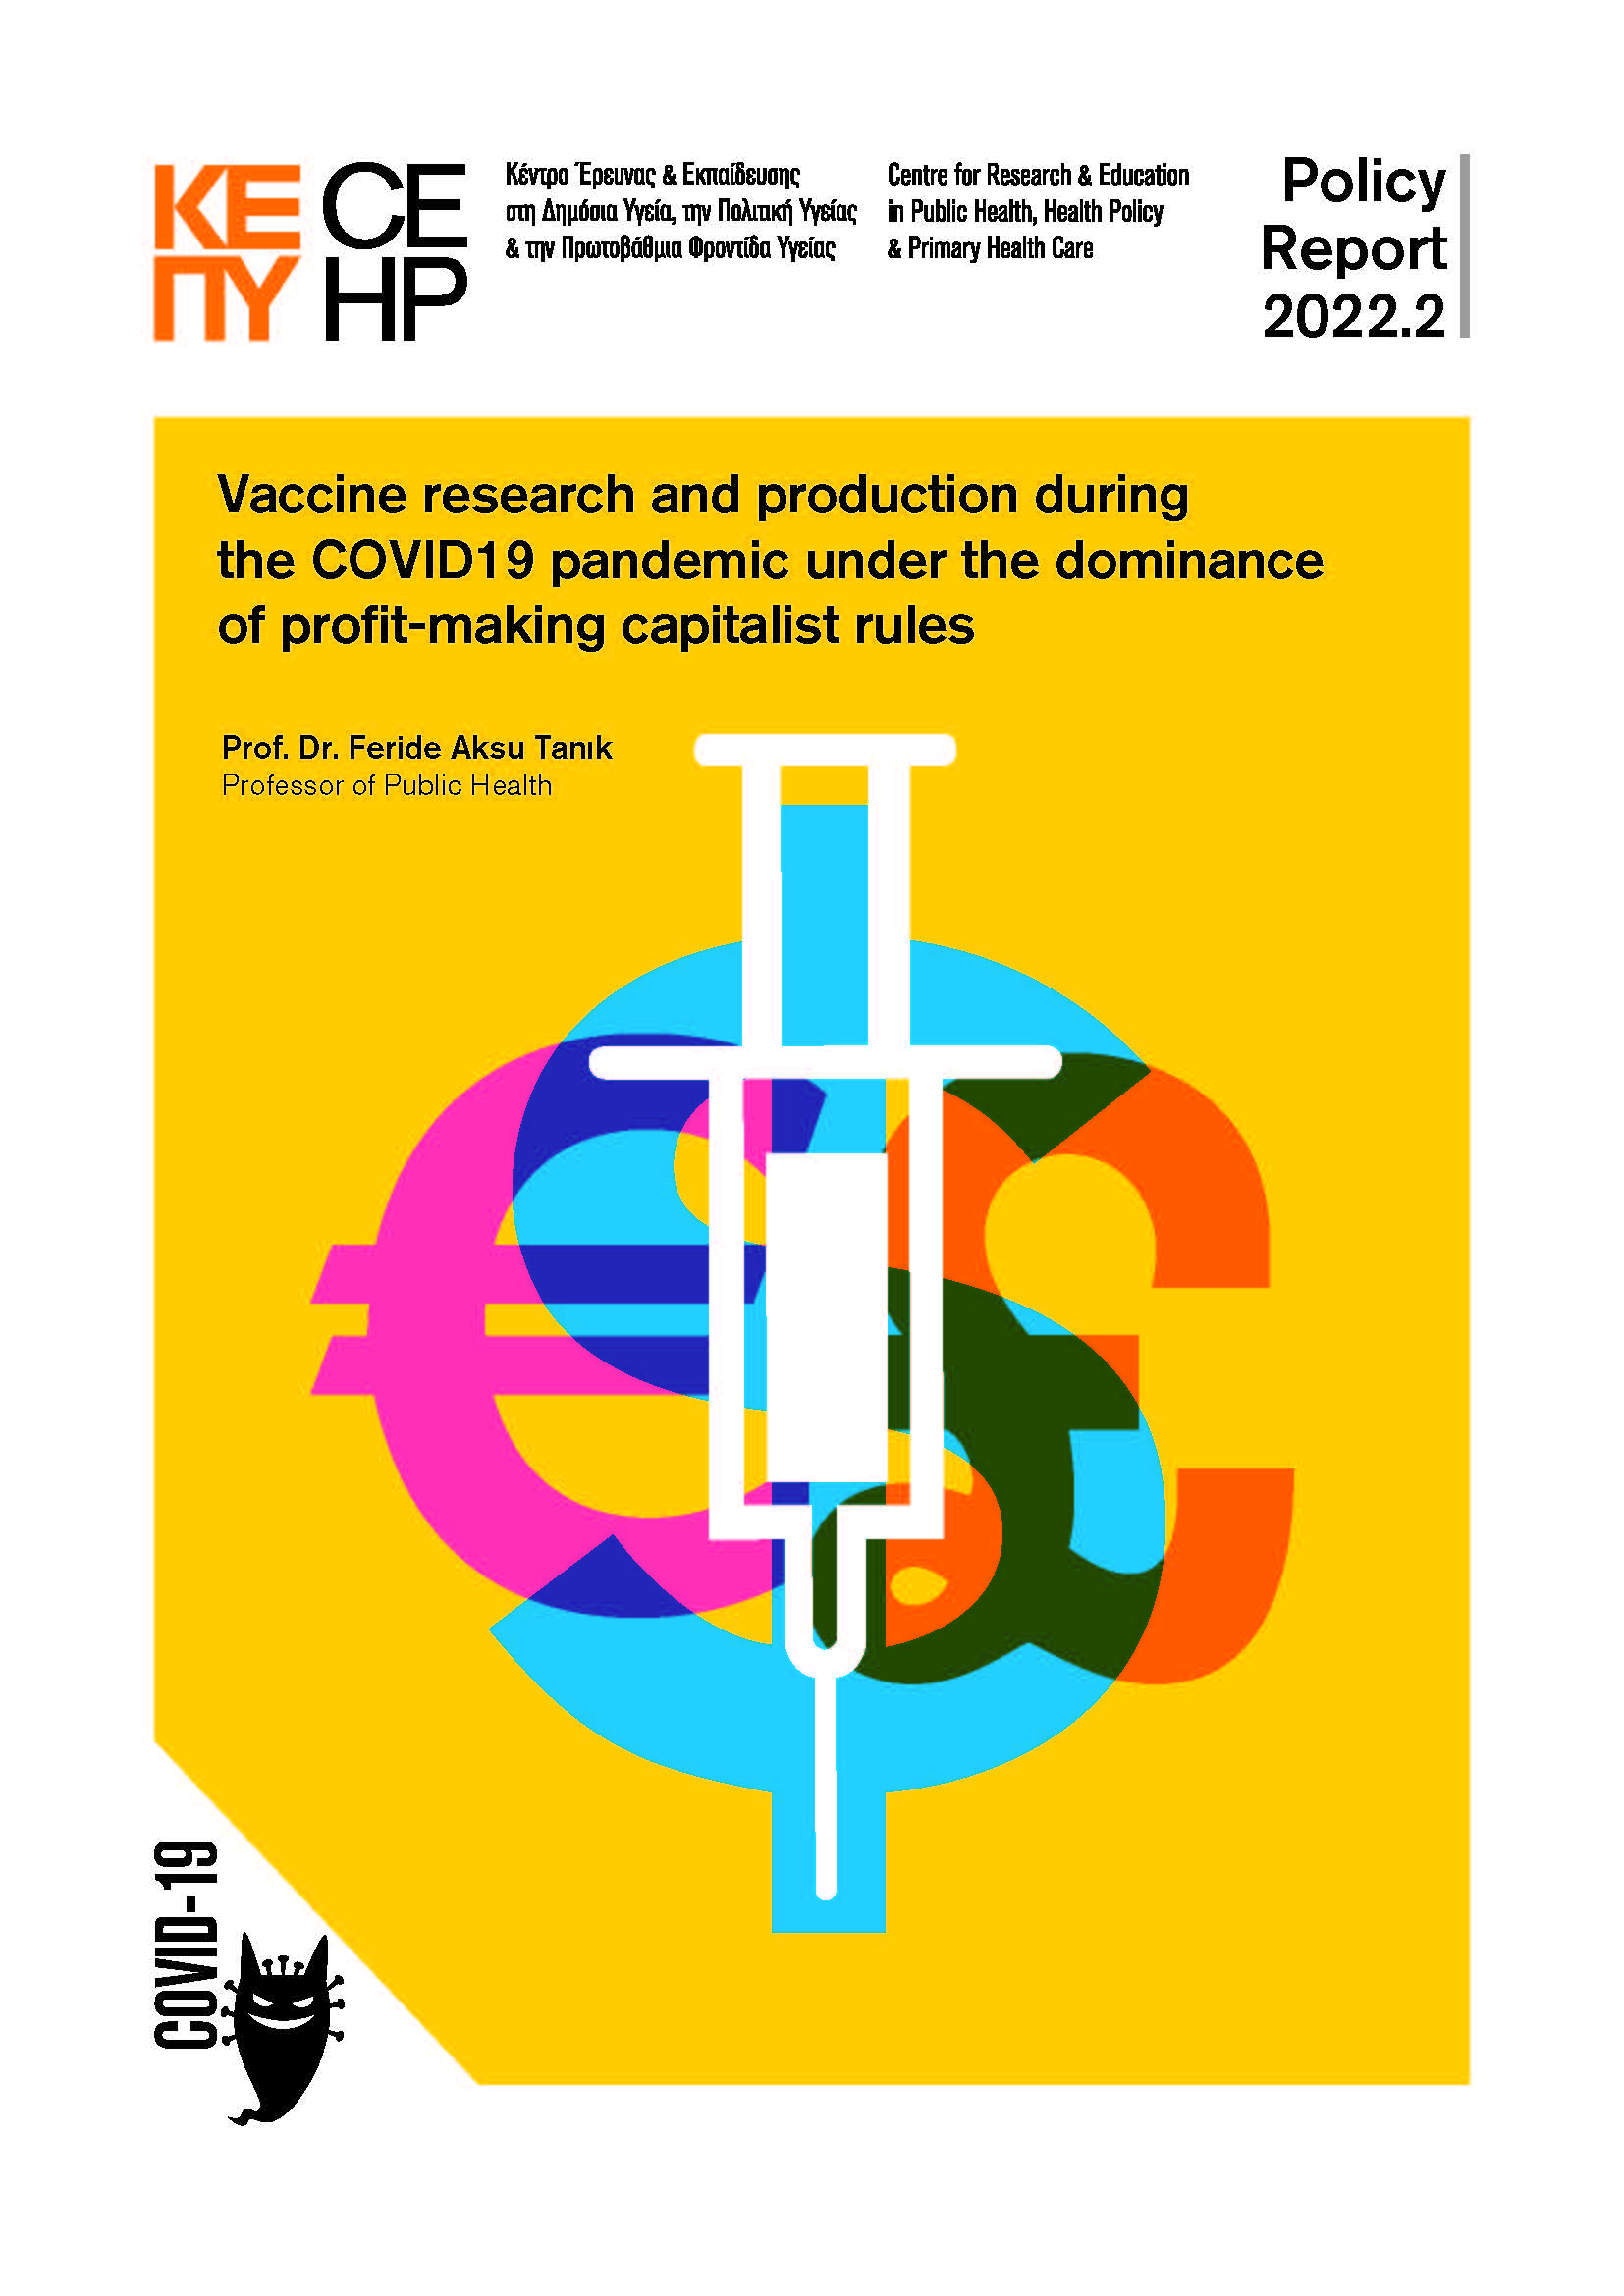 Vaccine research and production during the COVID19 pandemic under the dominance of profit-making capitalist rules